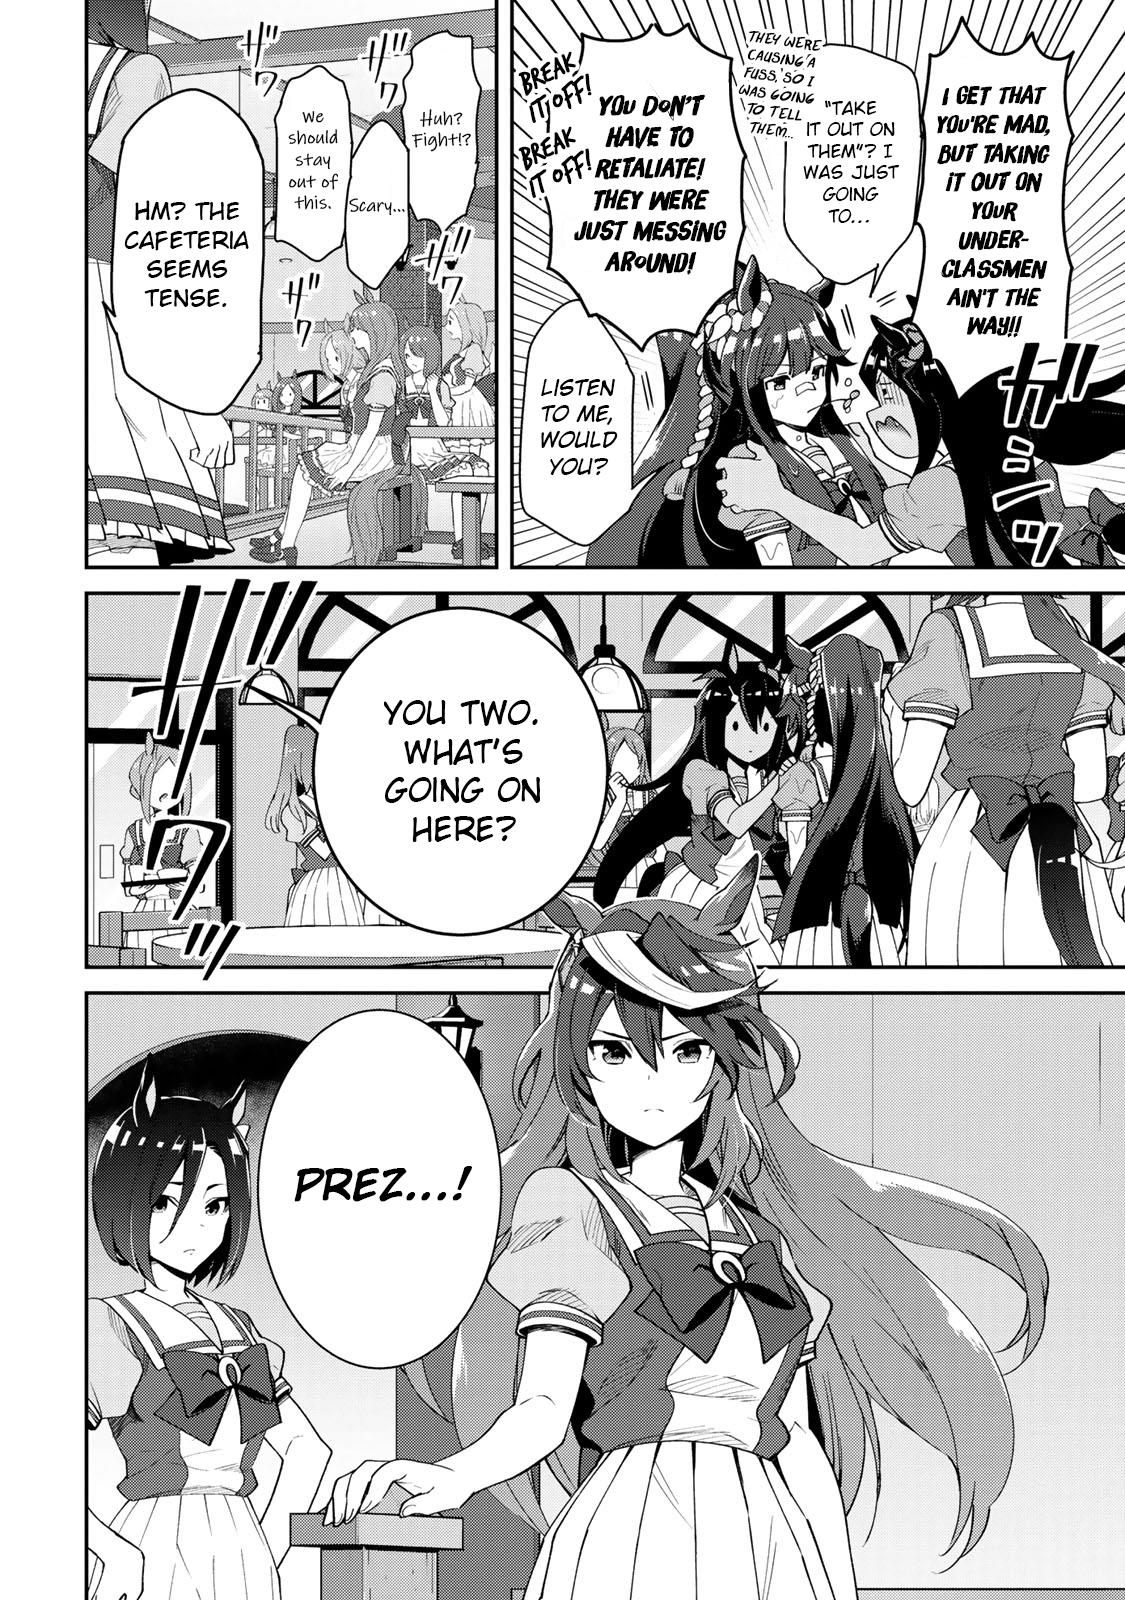 Starting Gate! Uma Musume Pretty Derby Vol.4 Chapter 26: Vodka And Scarlet #5 - Picture 2